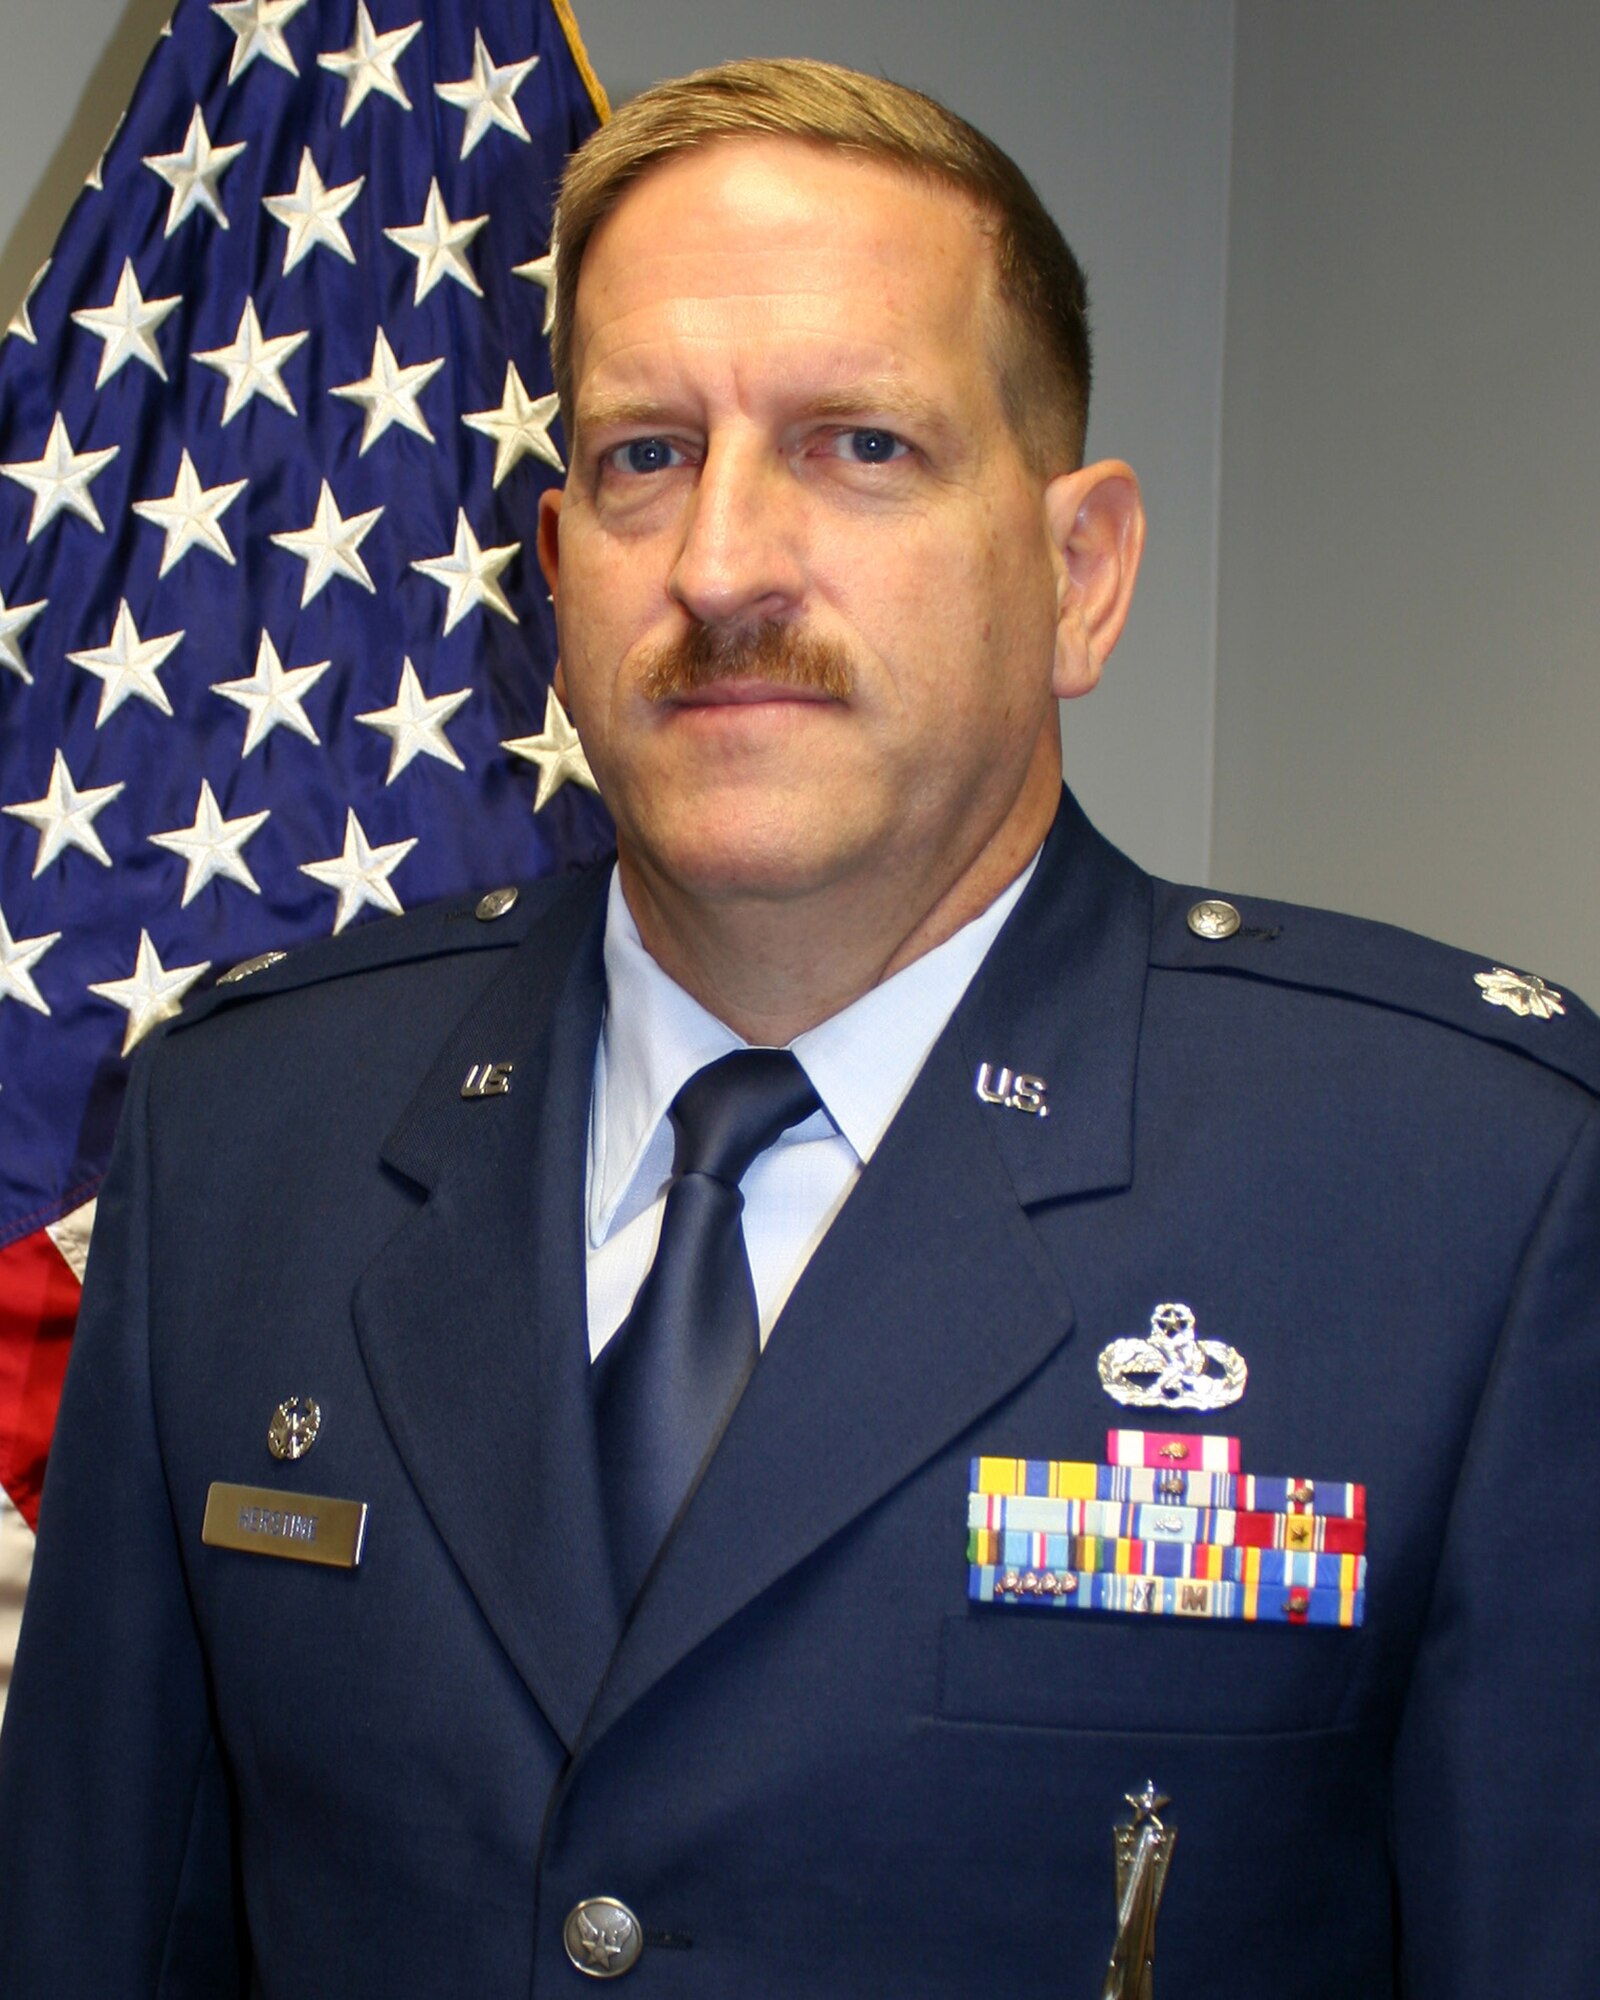 WRIGHT-PATTERSON AIR FORCE BASE, Ohio - Lt. Col. Kenneth Herstine is the 445th Force Support Squadron commander.
